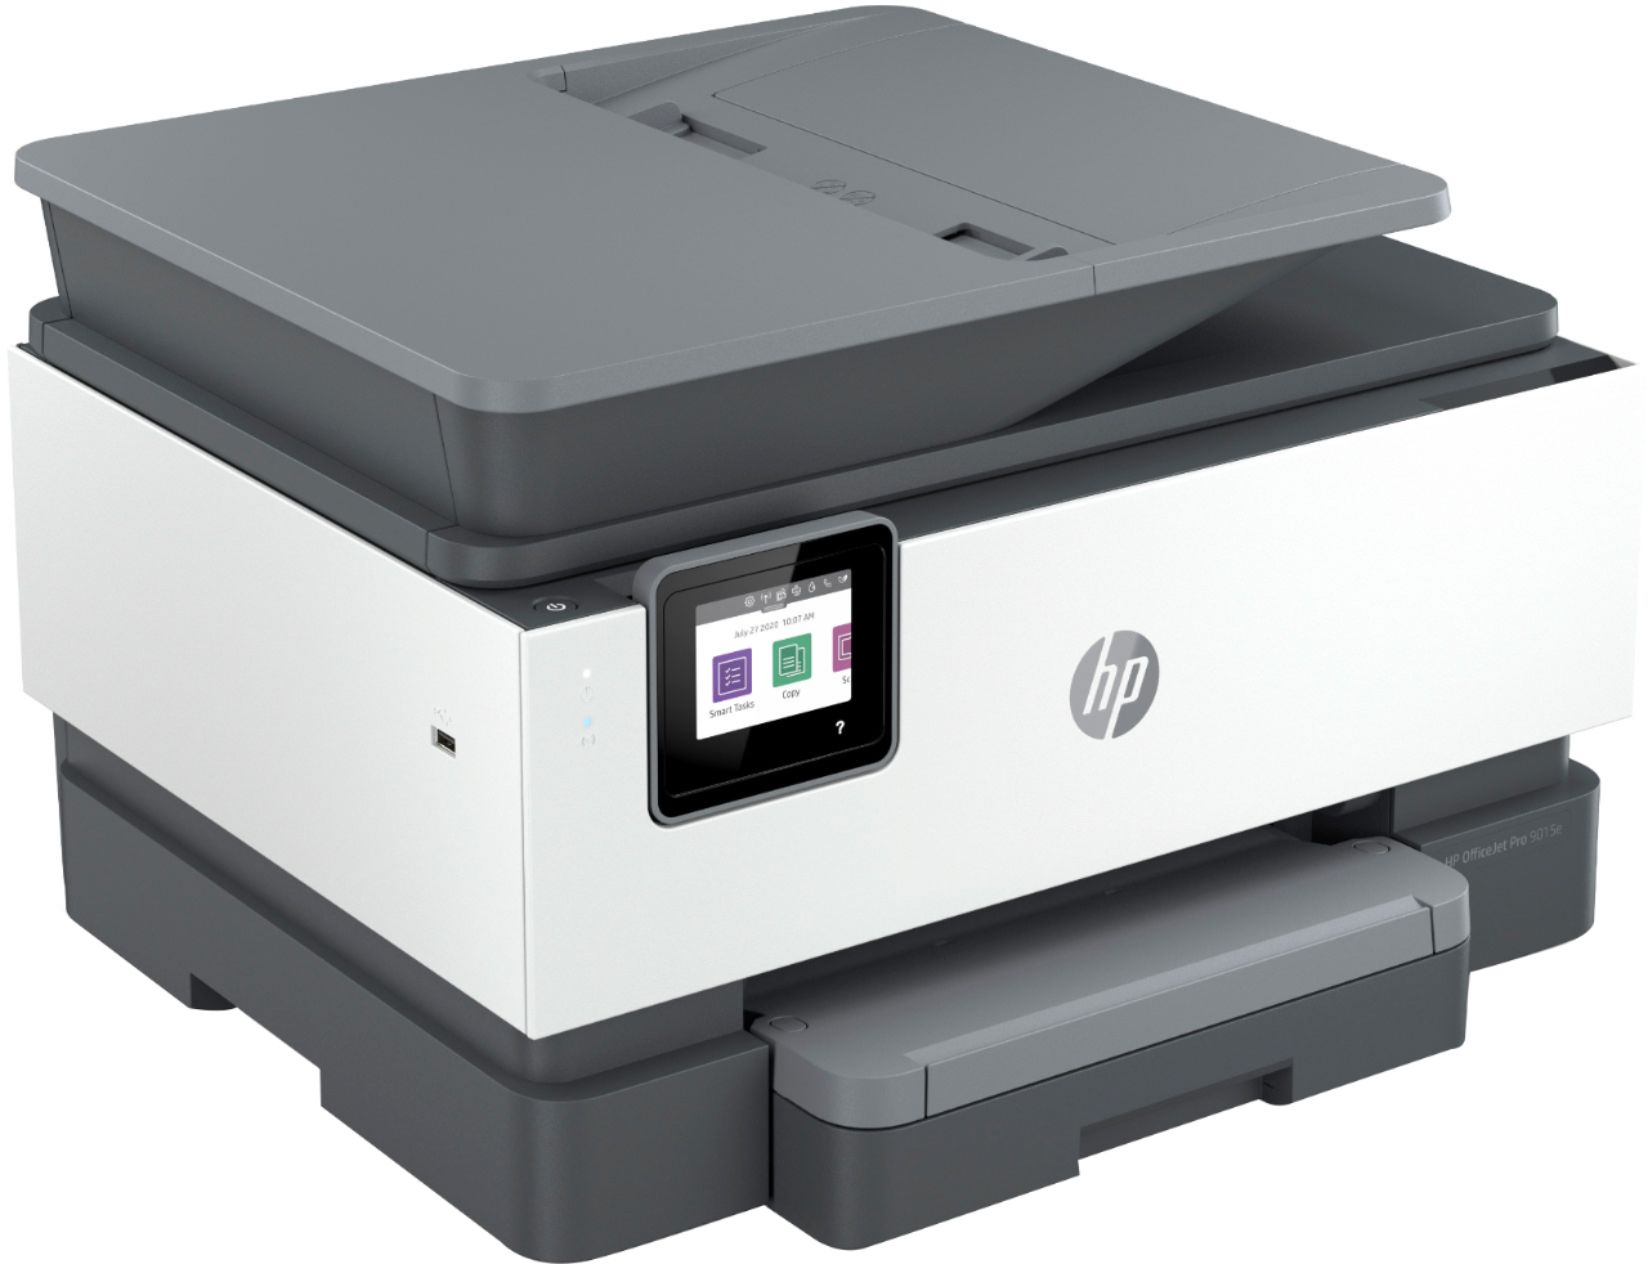 HP OfficeJet Pro 9015e Wireless All-In-One Inkjet Printer 6 months of Instant Ink Included with HP+ White OJP 9015e - Best Buy